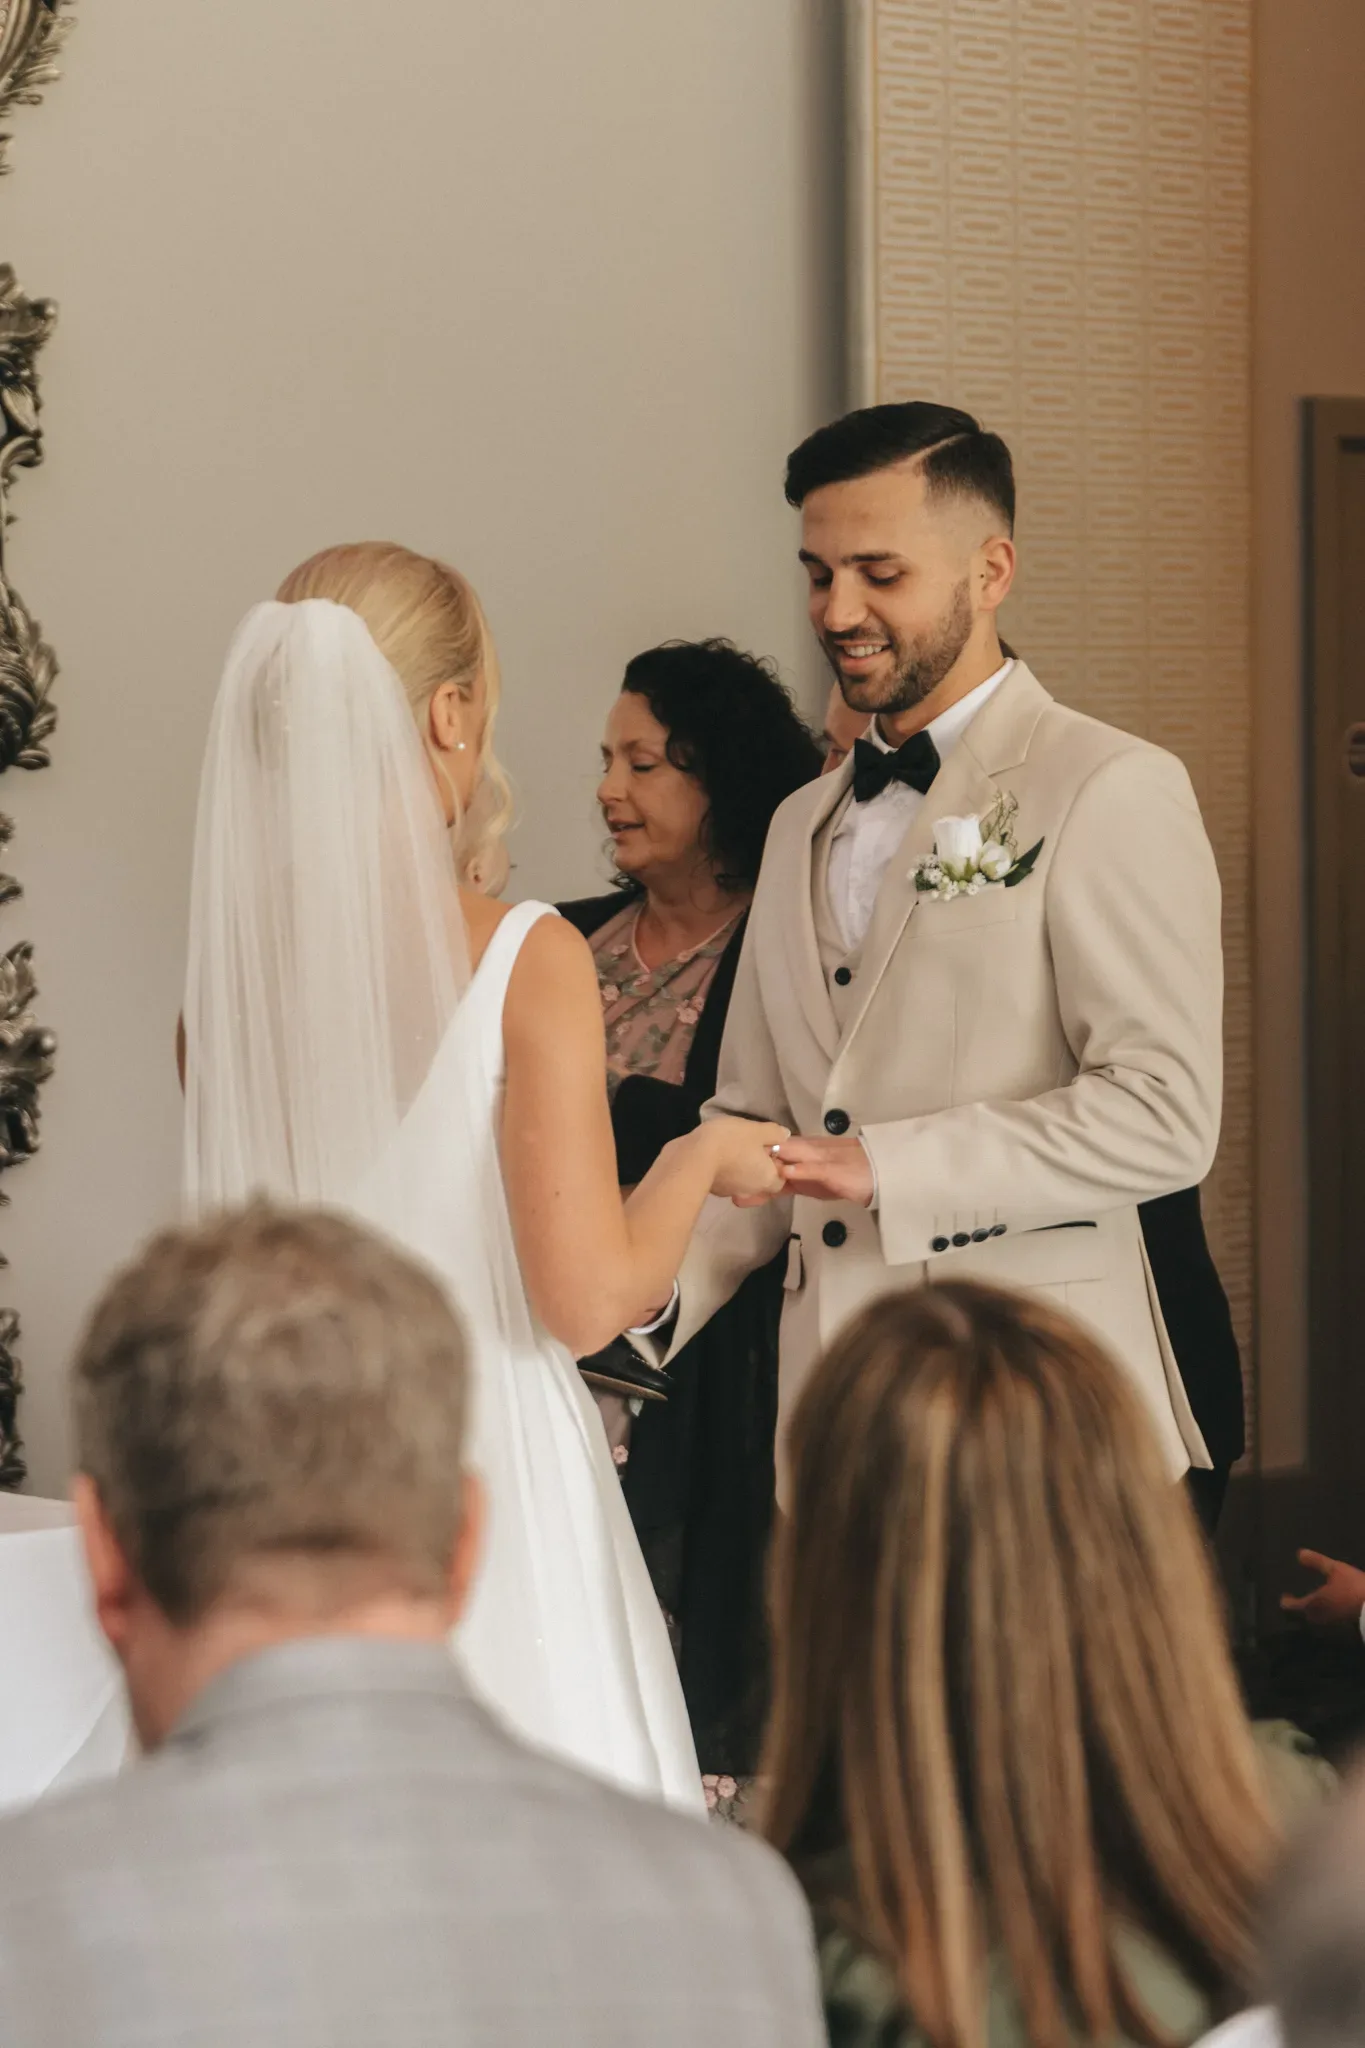 A bride and groom hold hands and exchange rings during their wedding ceremony, with an officiant smiling behind them. the groom is in a beige suit, while the bride wears a white dress and veil.